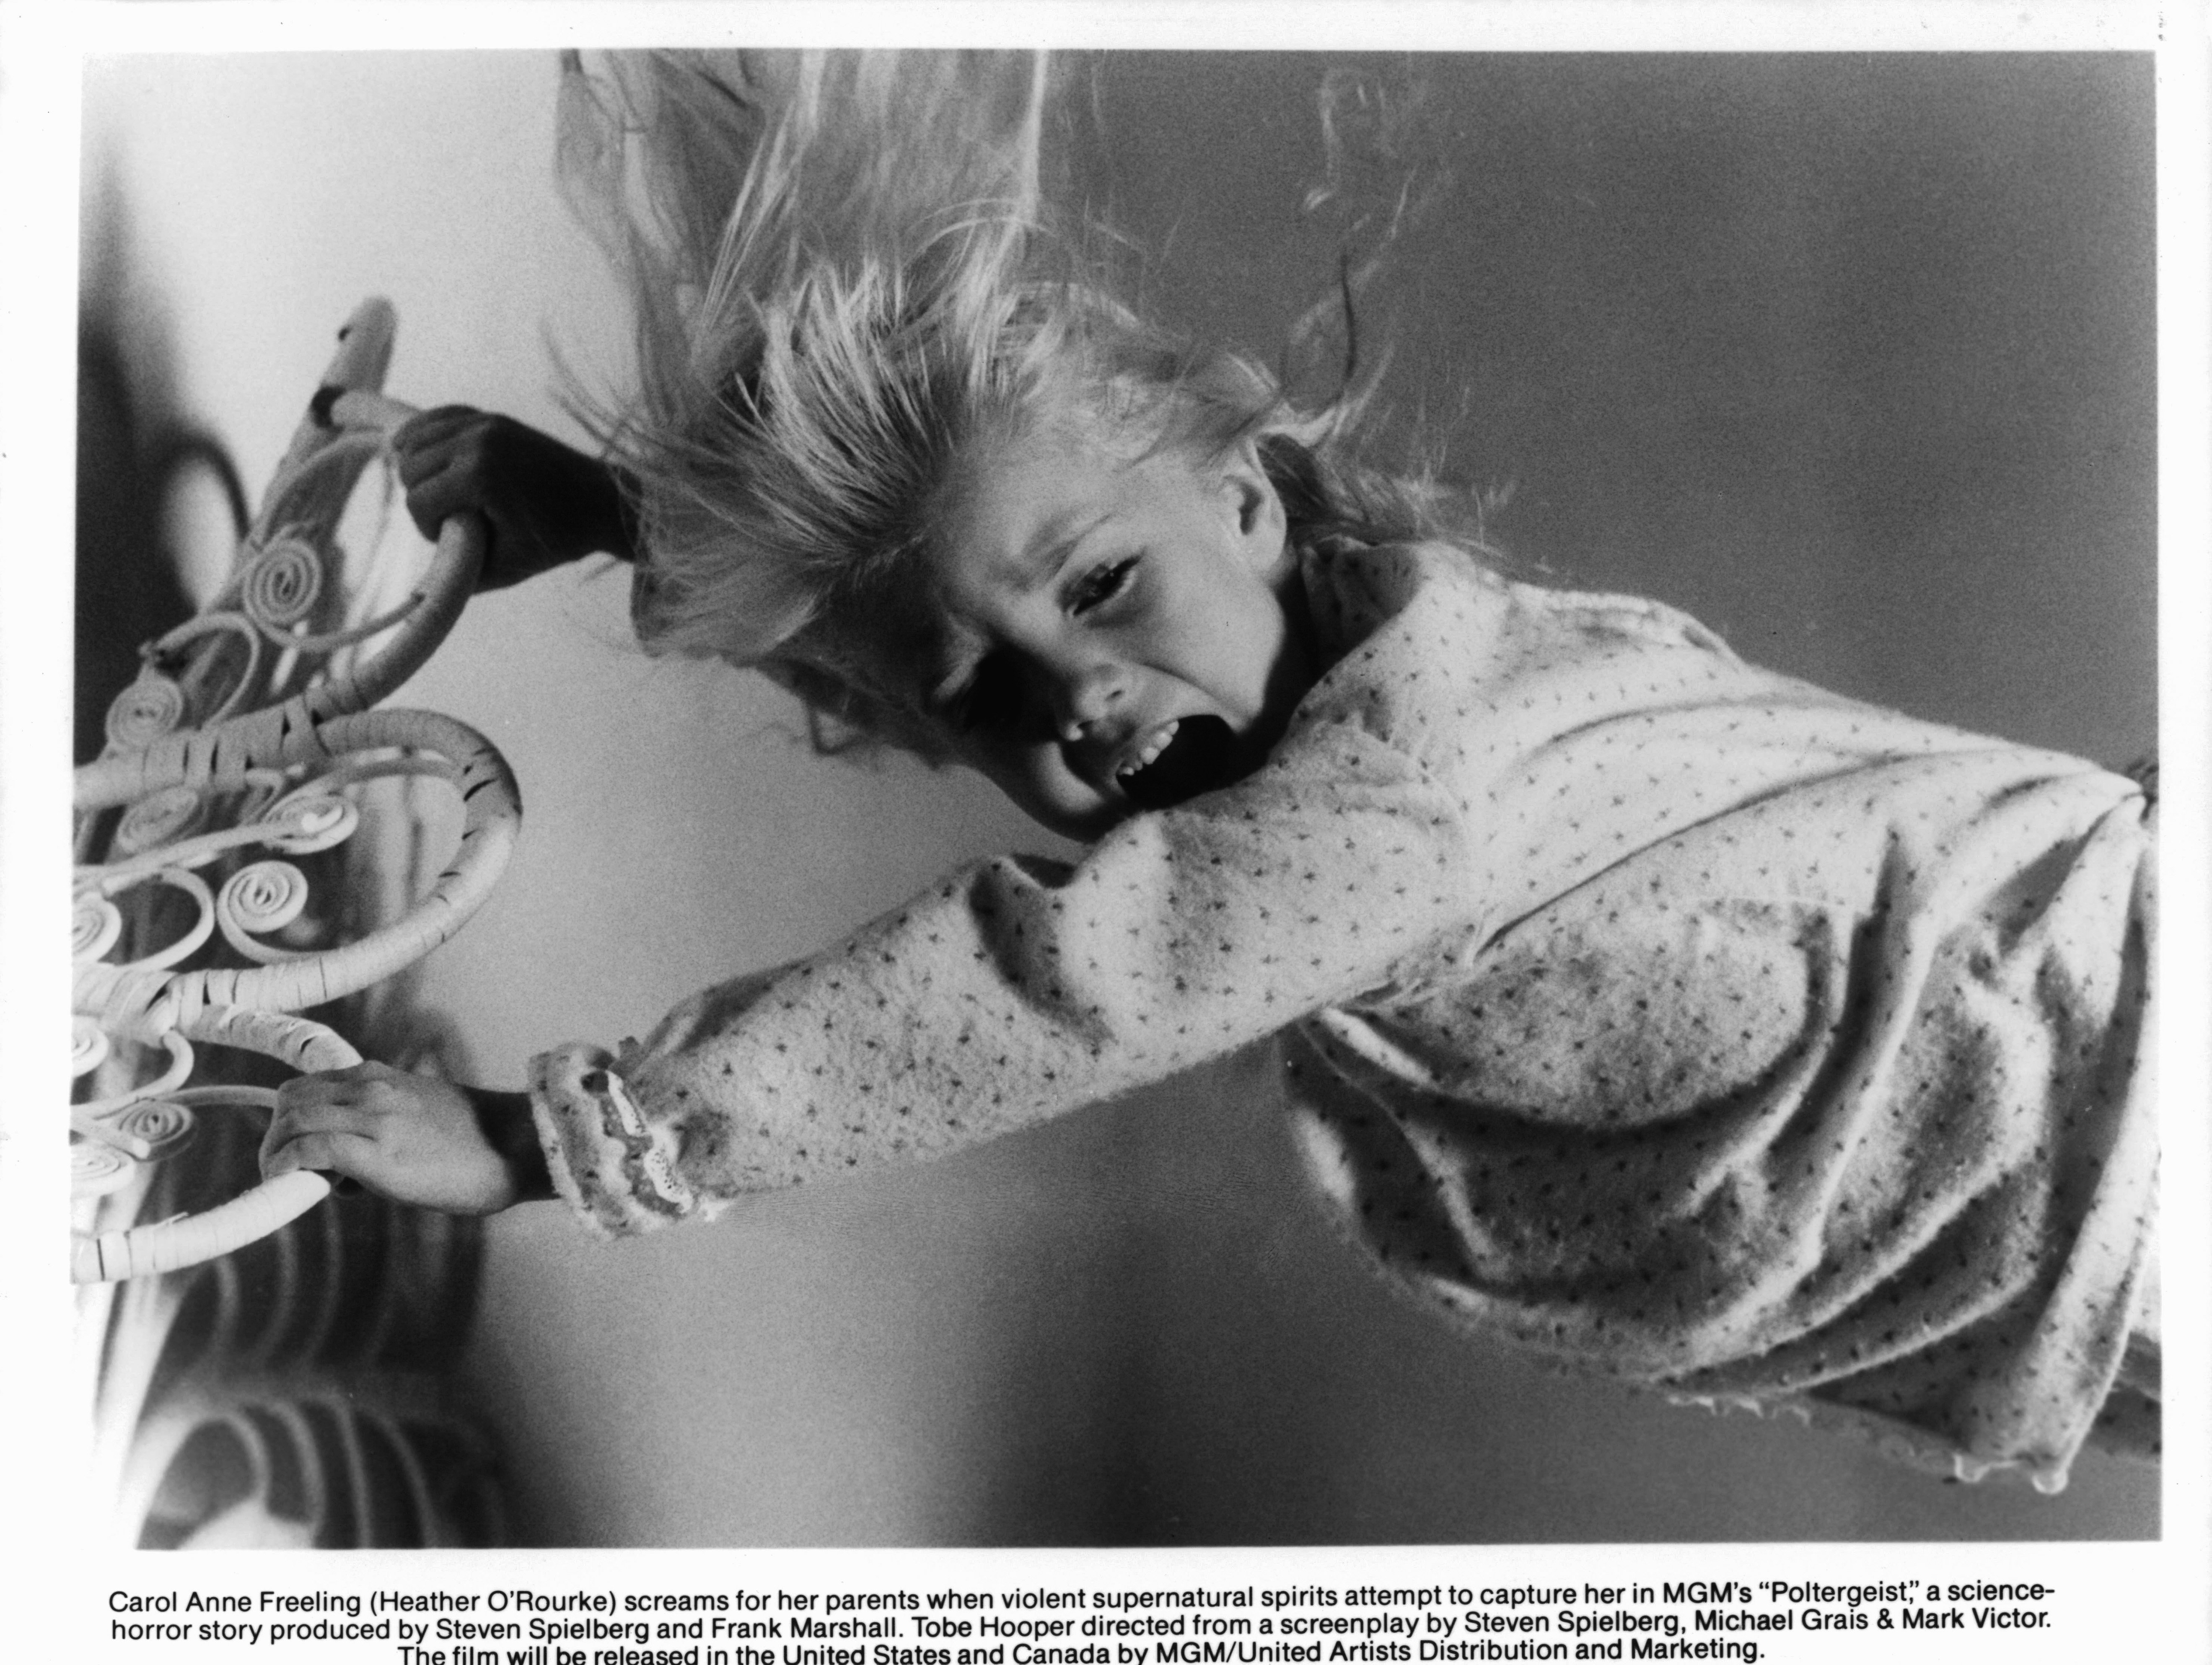 Steven Spielberg’s Chilling ‘Poltergeist’ 1982 Horror Movie Was Based on a True Story